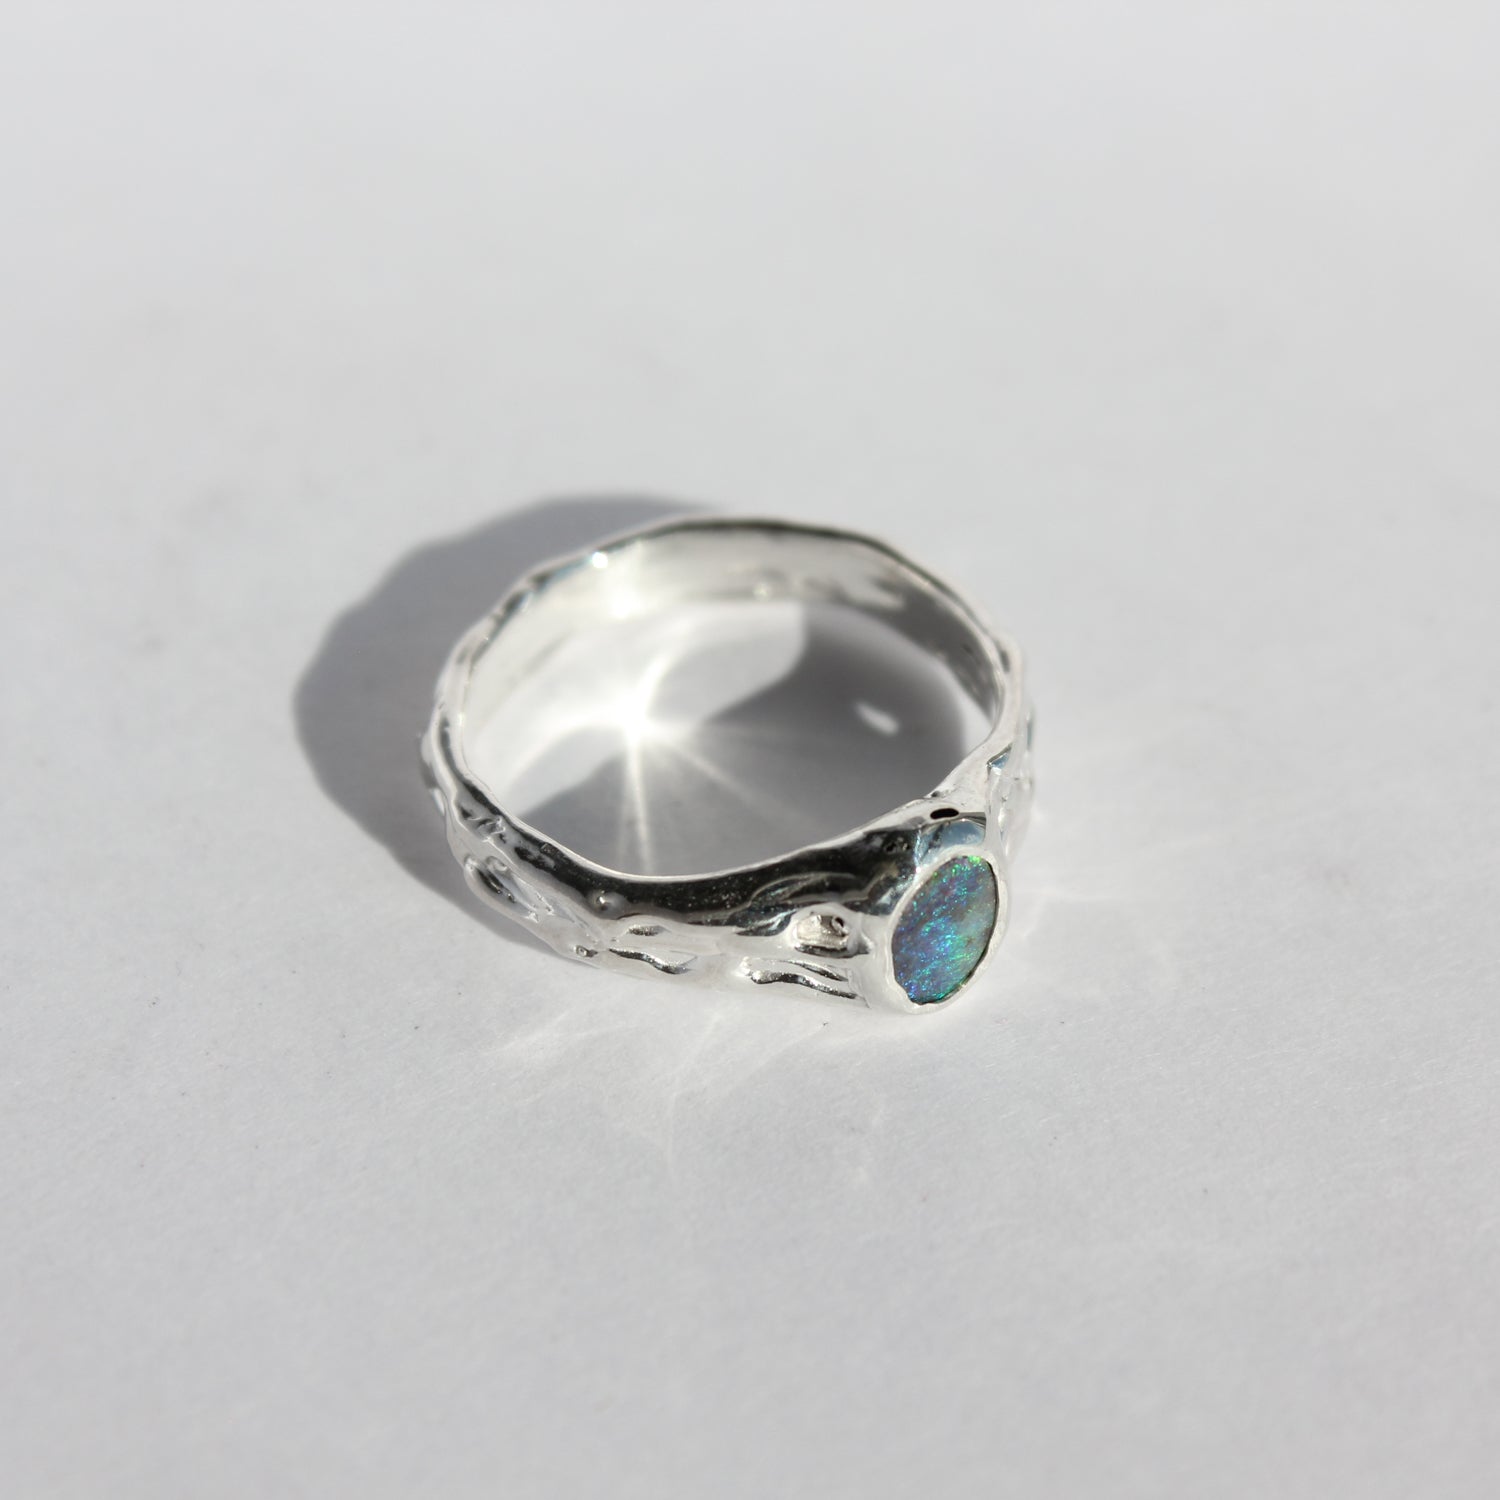 Mini Crater Ring - Size 7.25